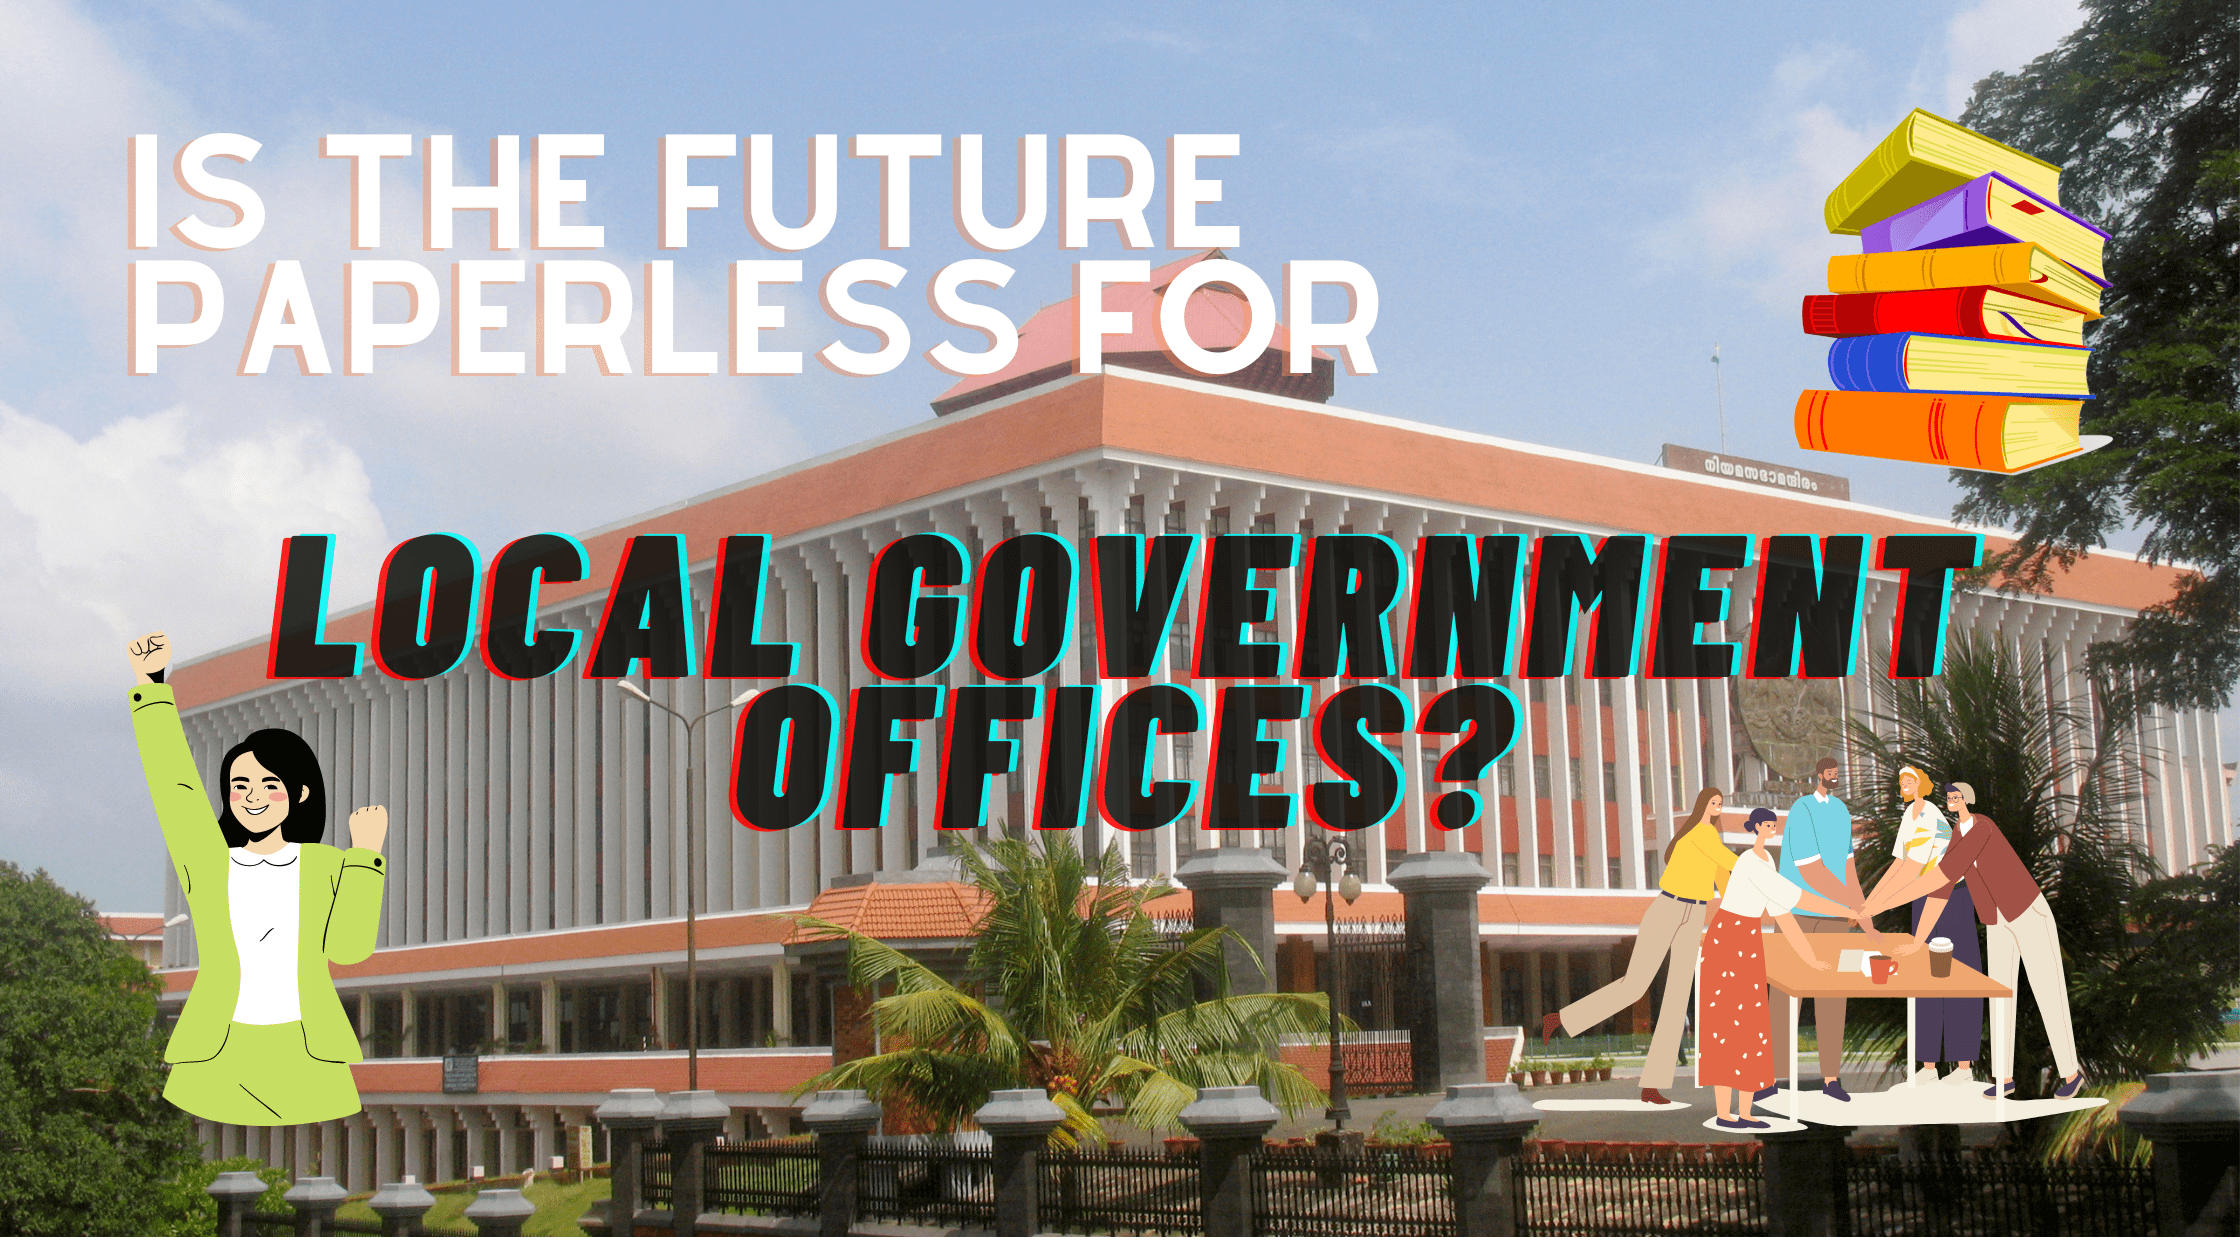 Is the future paperless for local government offices?